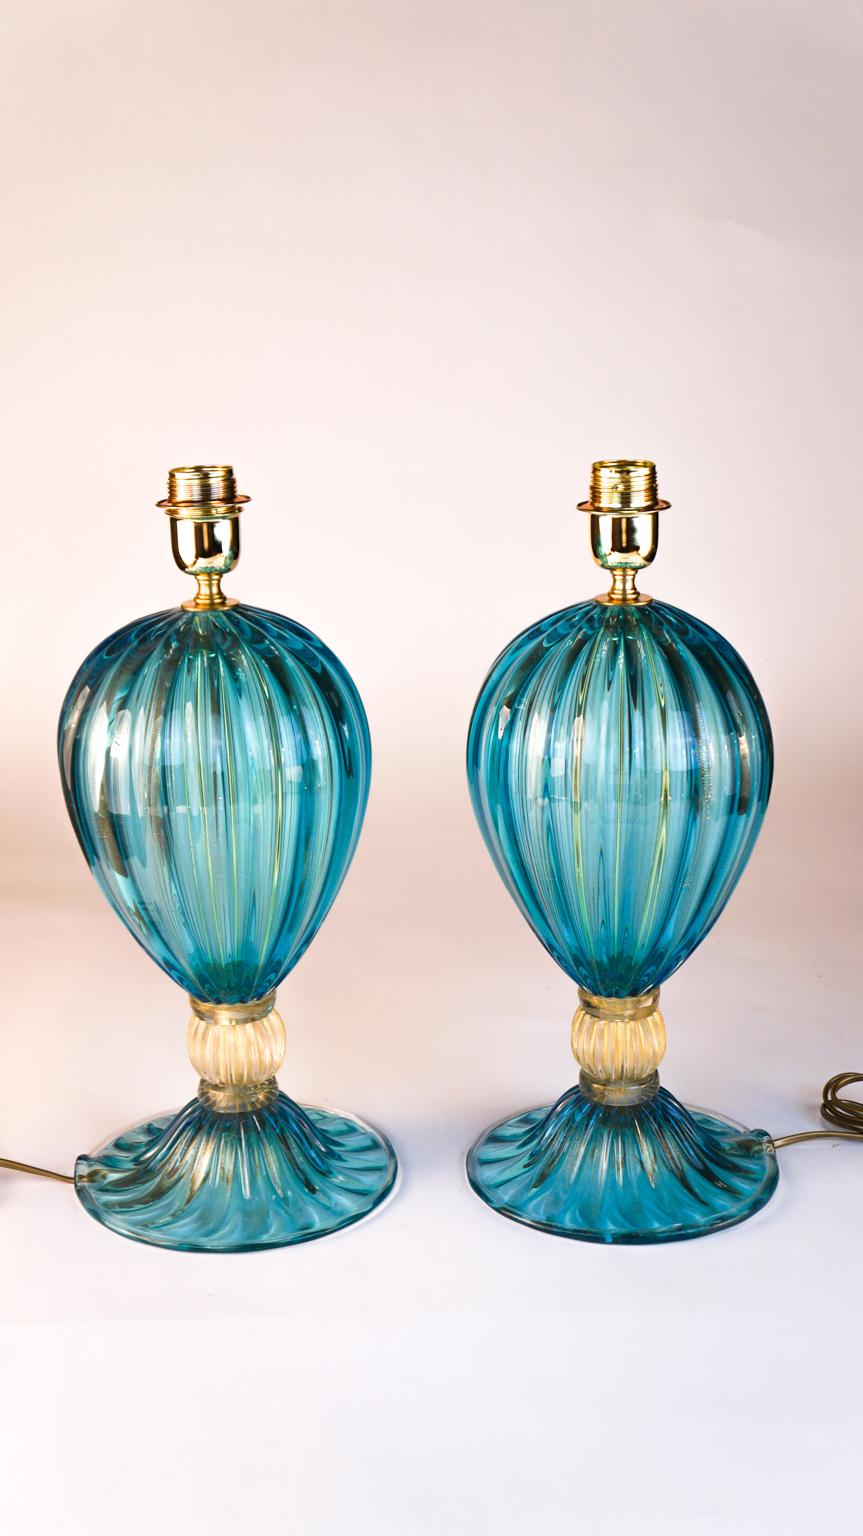 Alberto Donà Pair of Light Blue Italian Murano Glass Table Lamps Veronese, 1980s For Sale 5